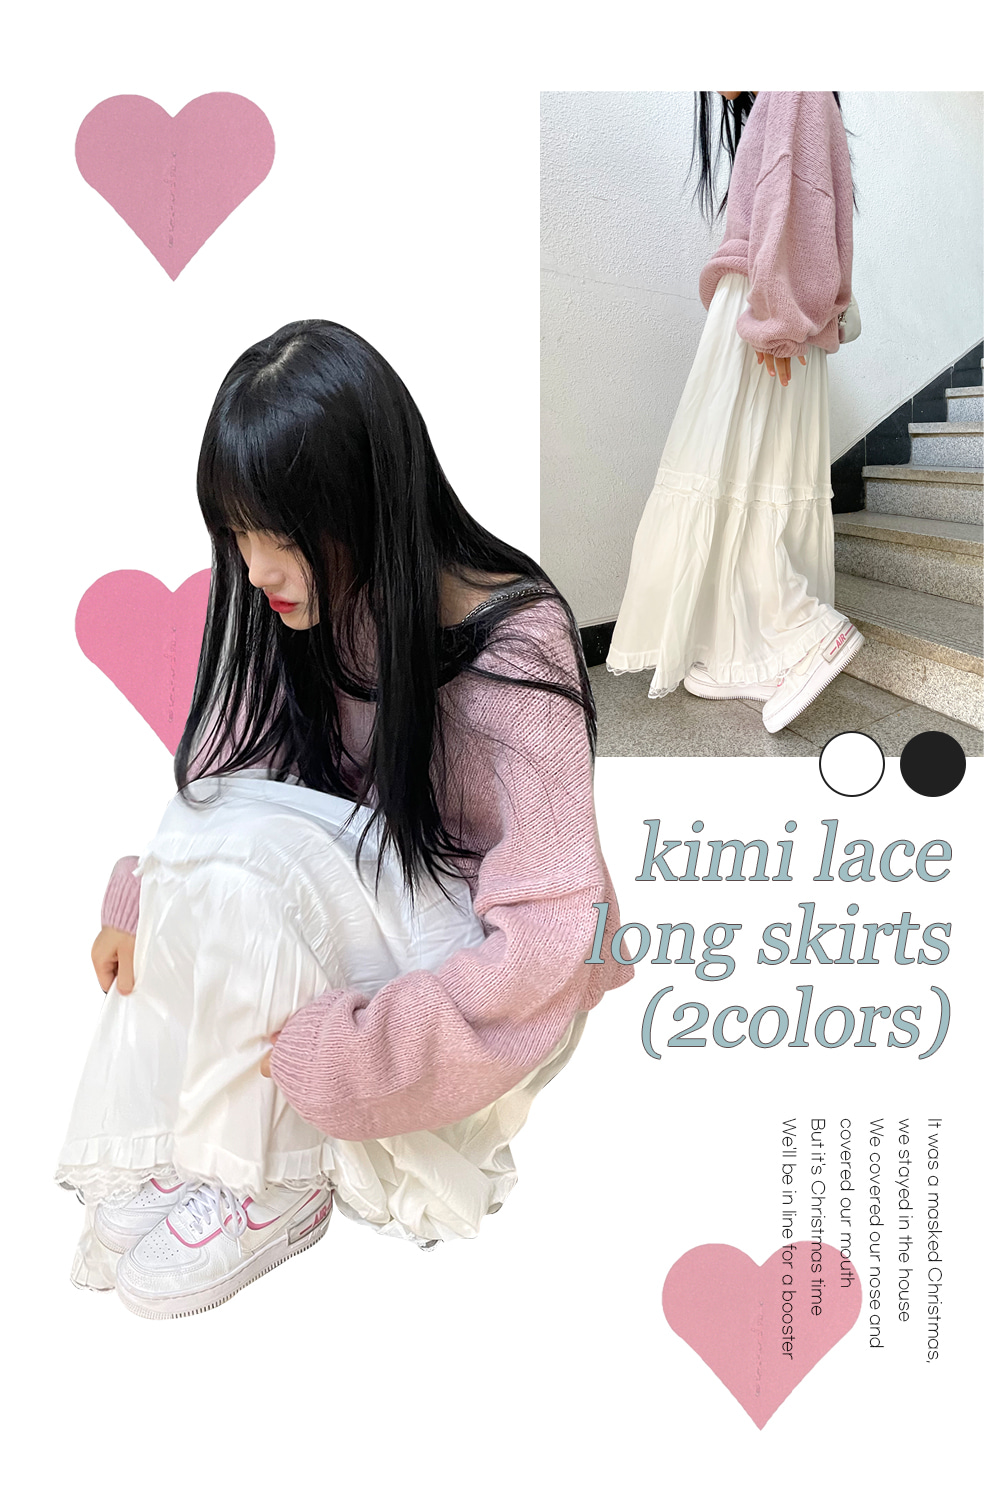 kimi lace long skirts (2colors)